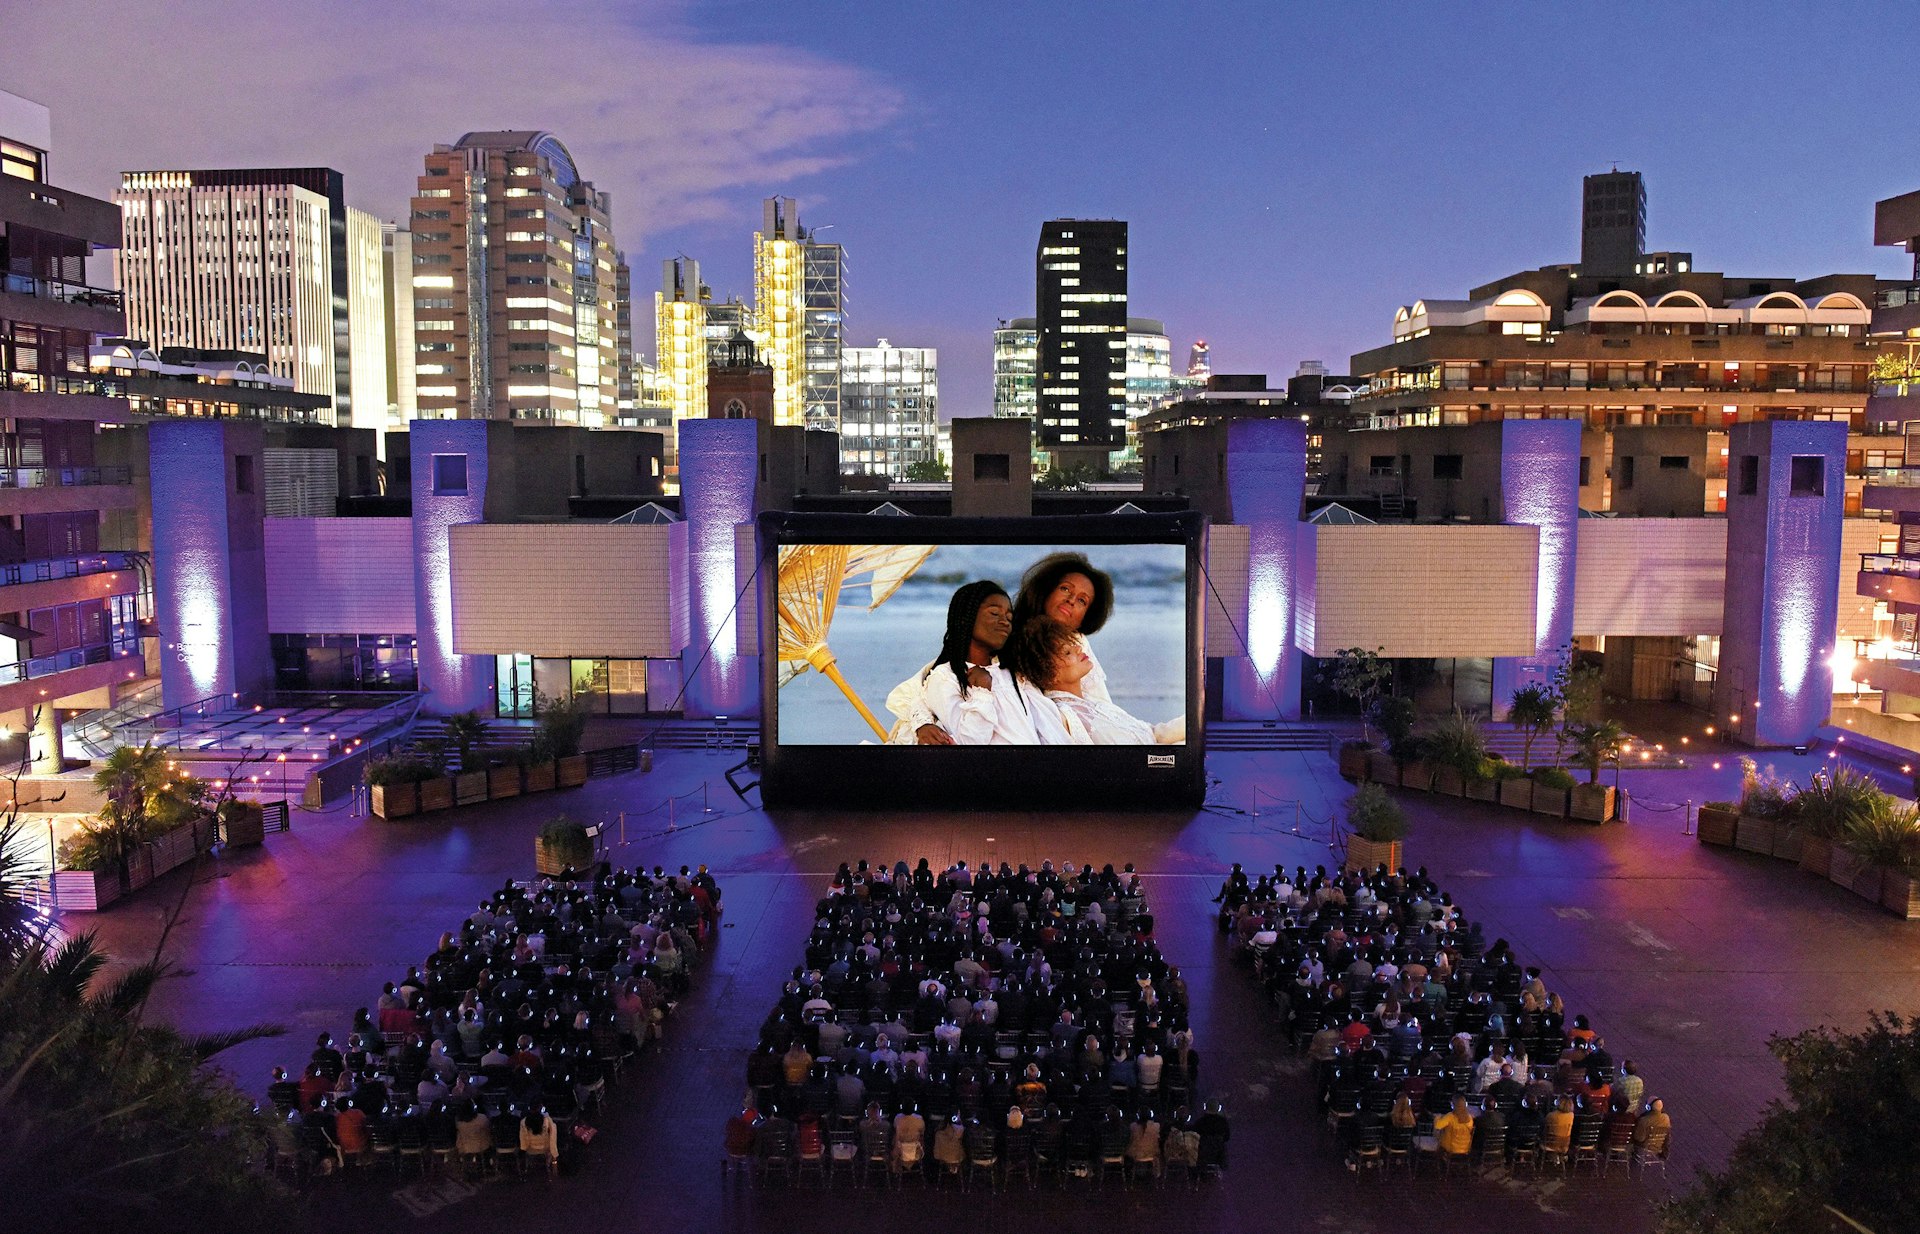 People watching a movie on a big screen at dusk at the Barbican Outdoor Cinema